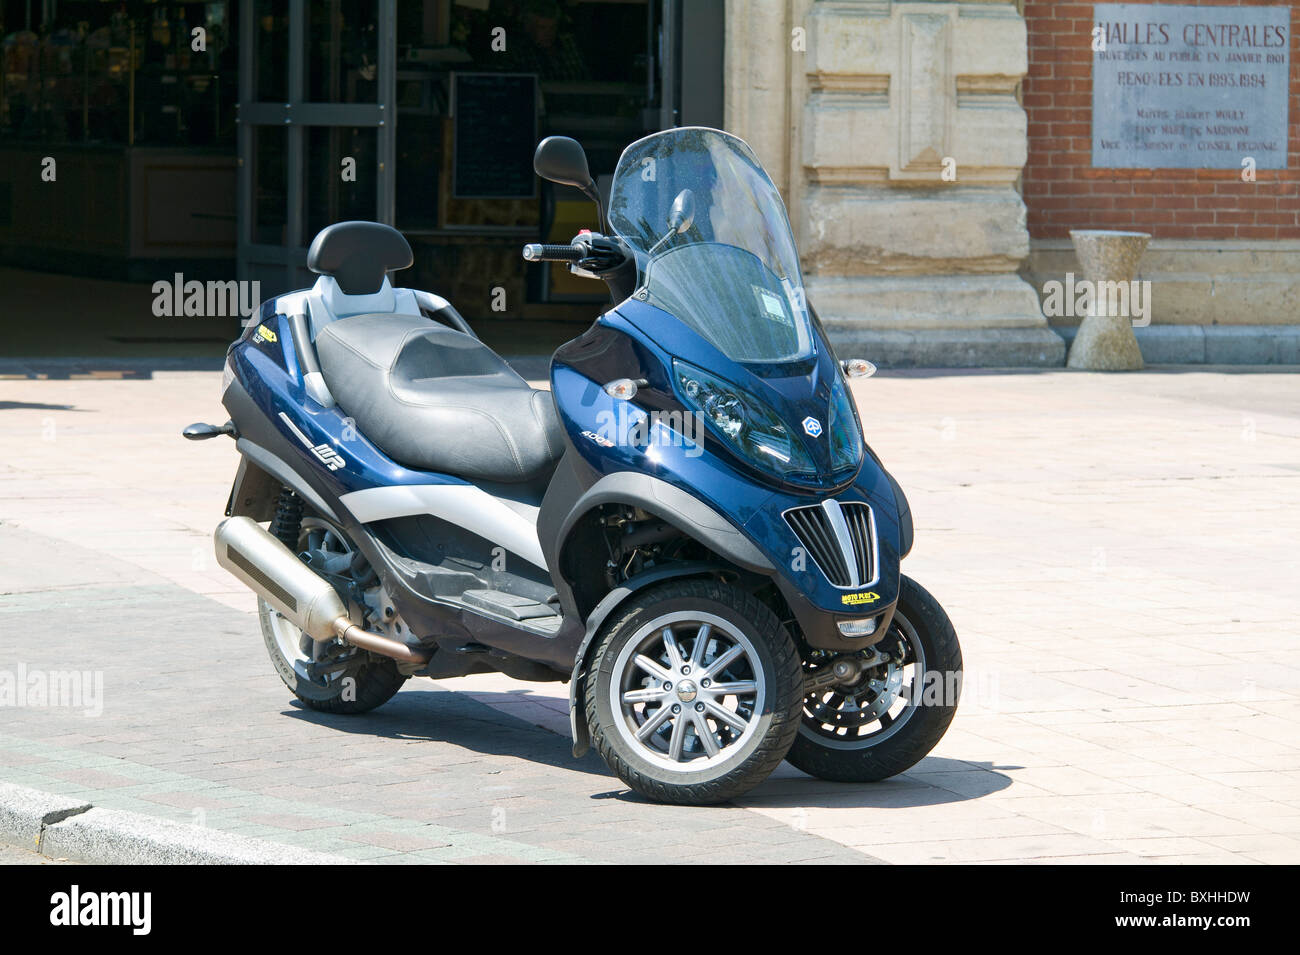 Piaggio MP3 LT Scooter in Narbonne France Stock Photo - Alamy